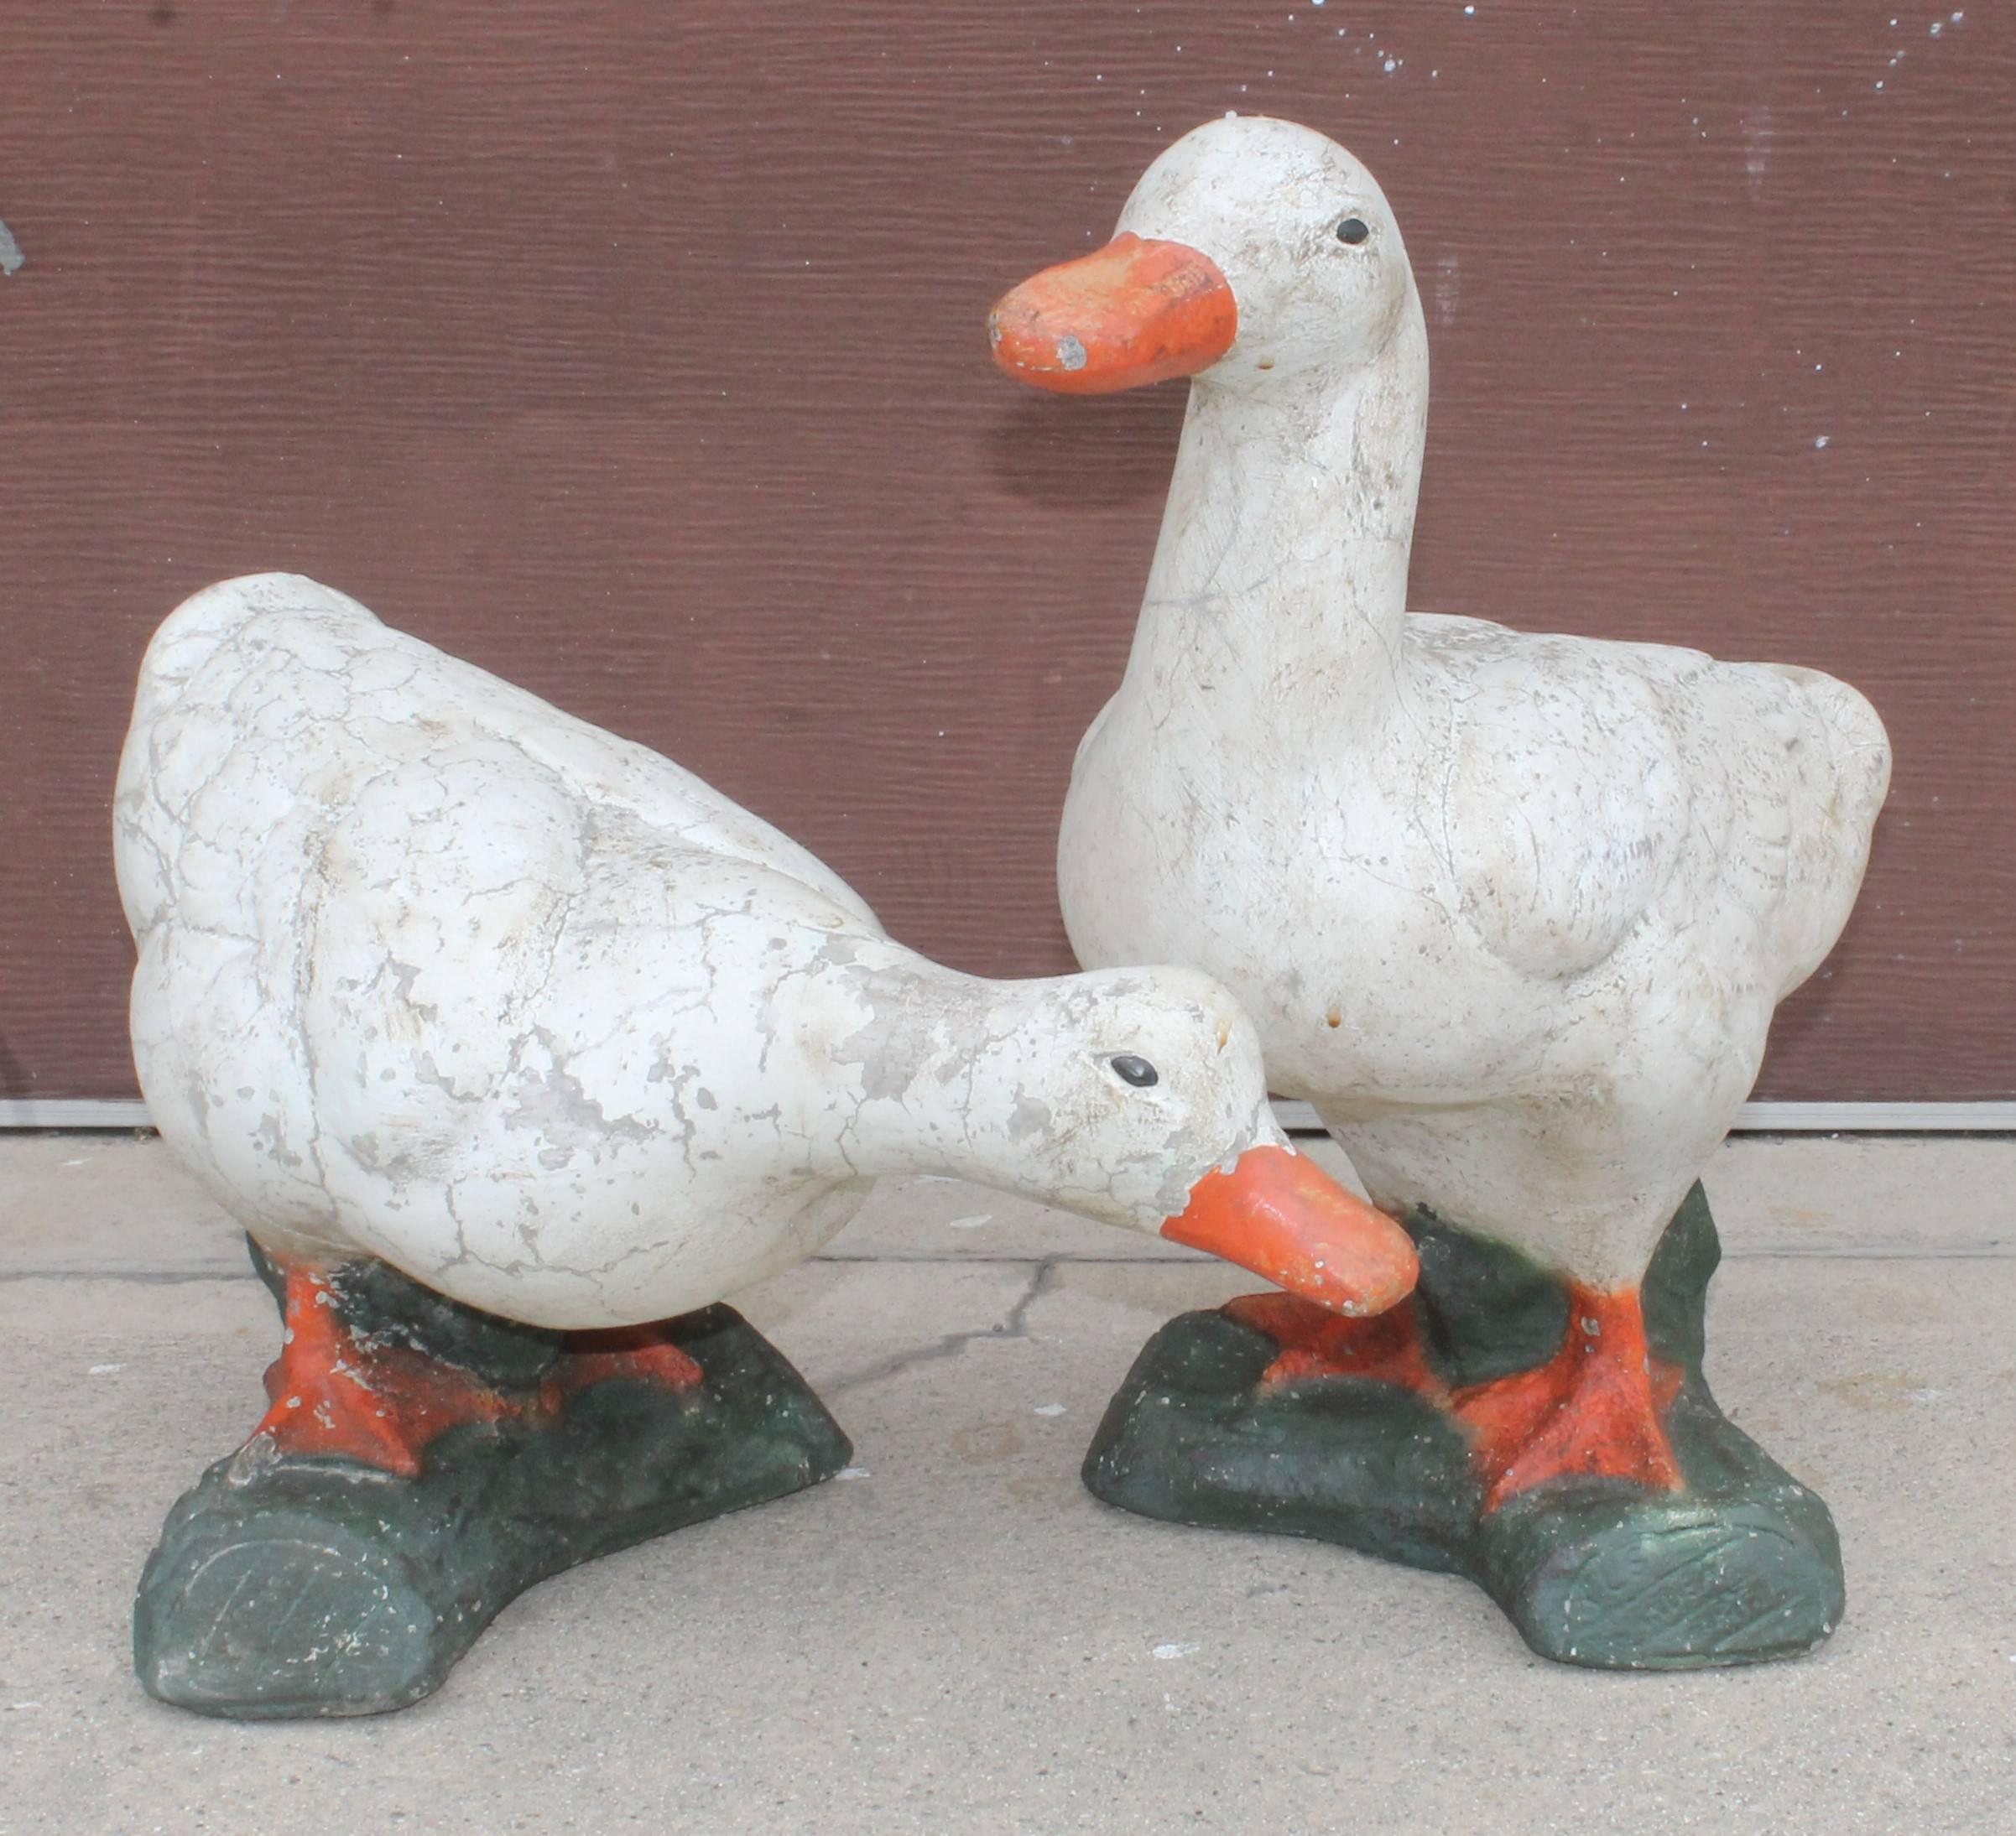 This pair of heavy monumental concrete garden ducks were found in Pennsylvania on a farm lot. The condition is good with minor crazing in paint consistent with age and use.